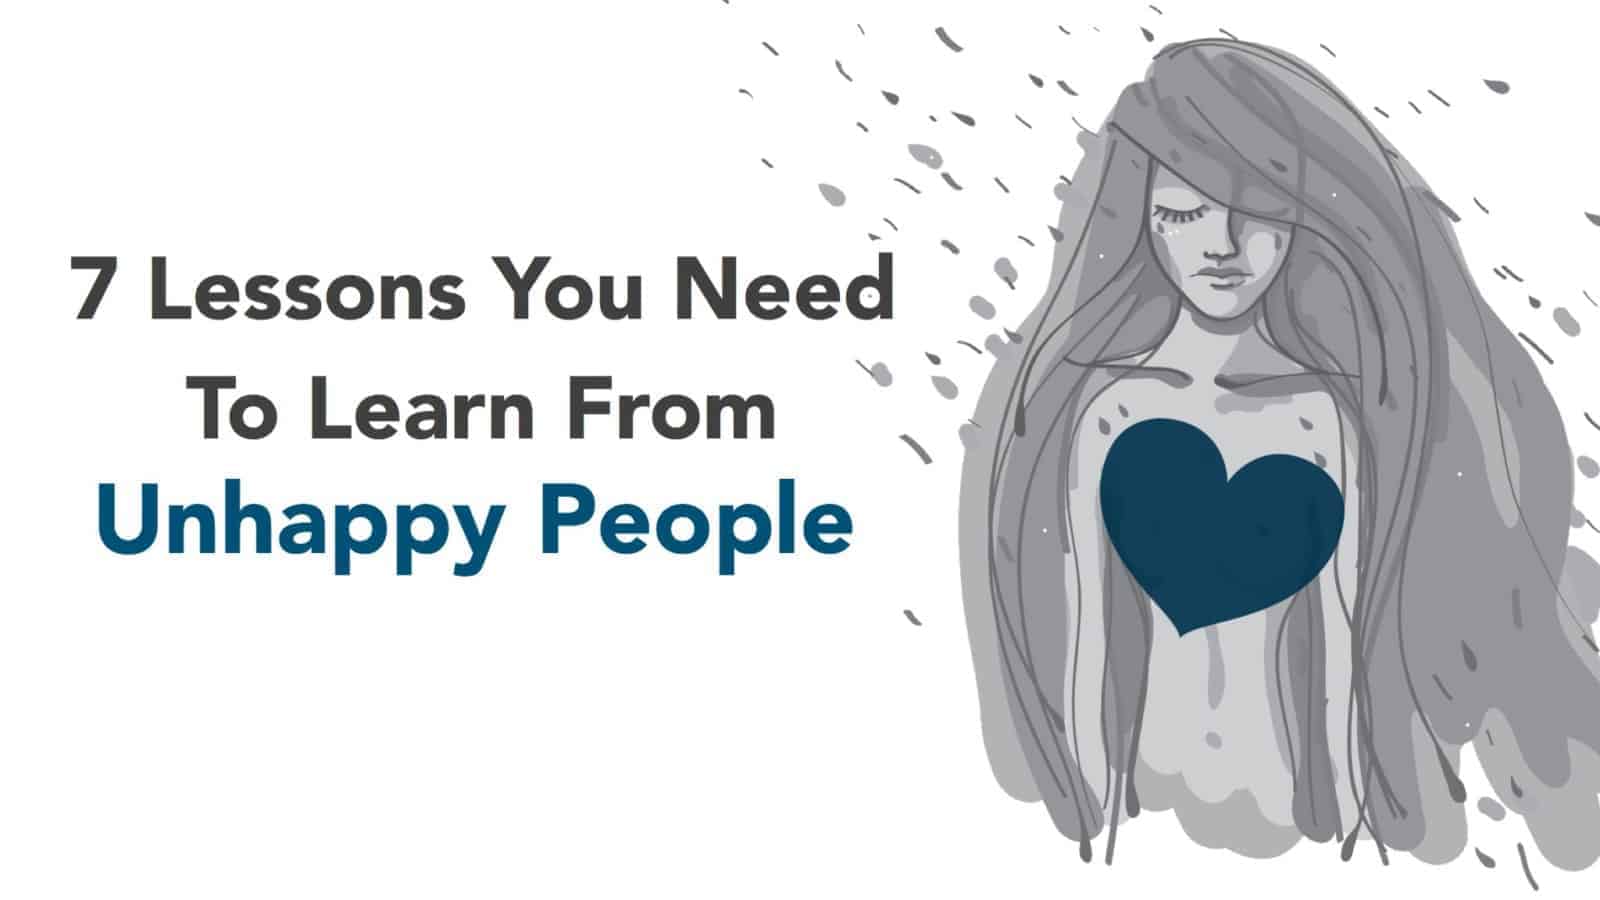 7 Lessons To Learn From Unhappy People